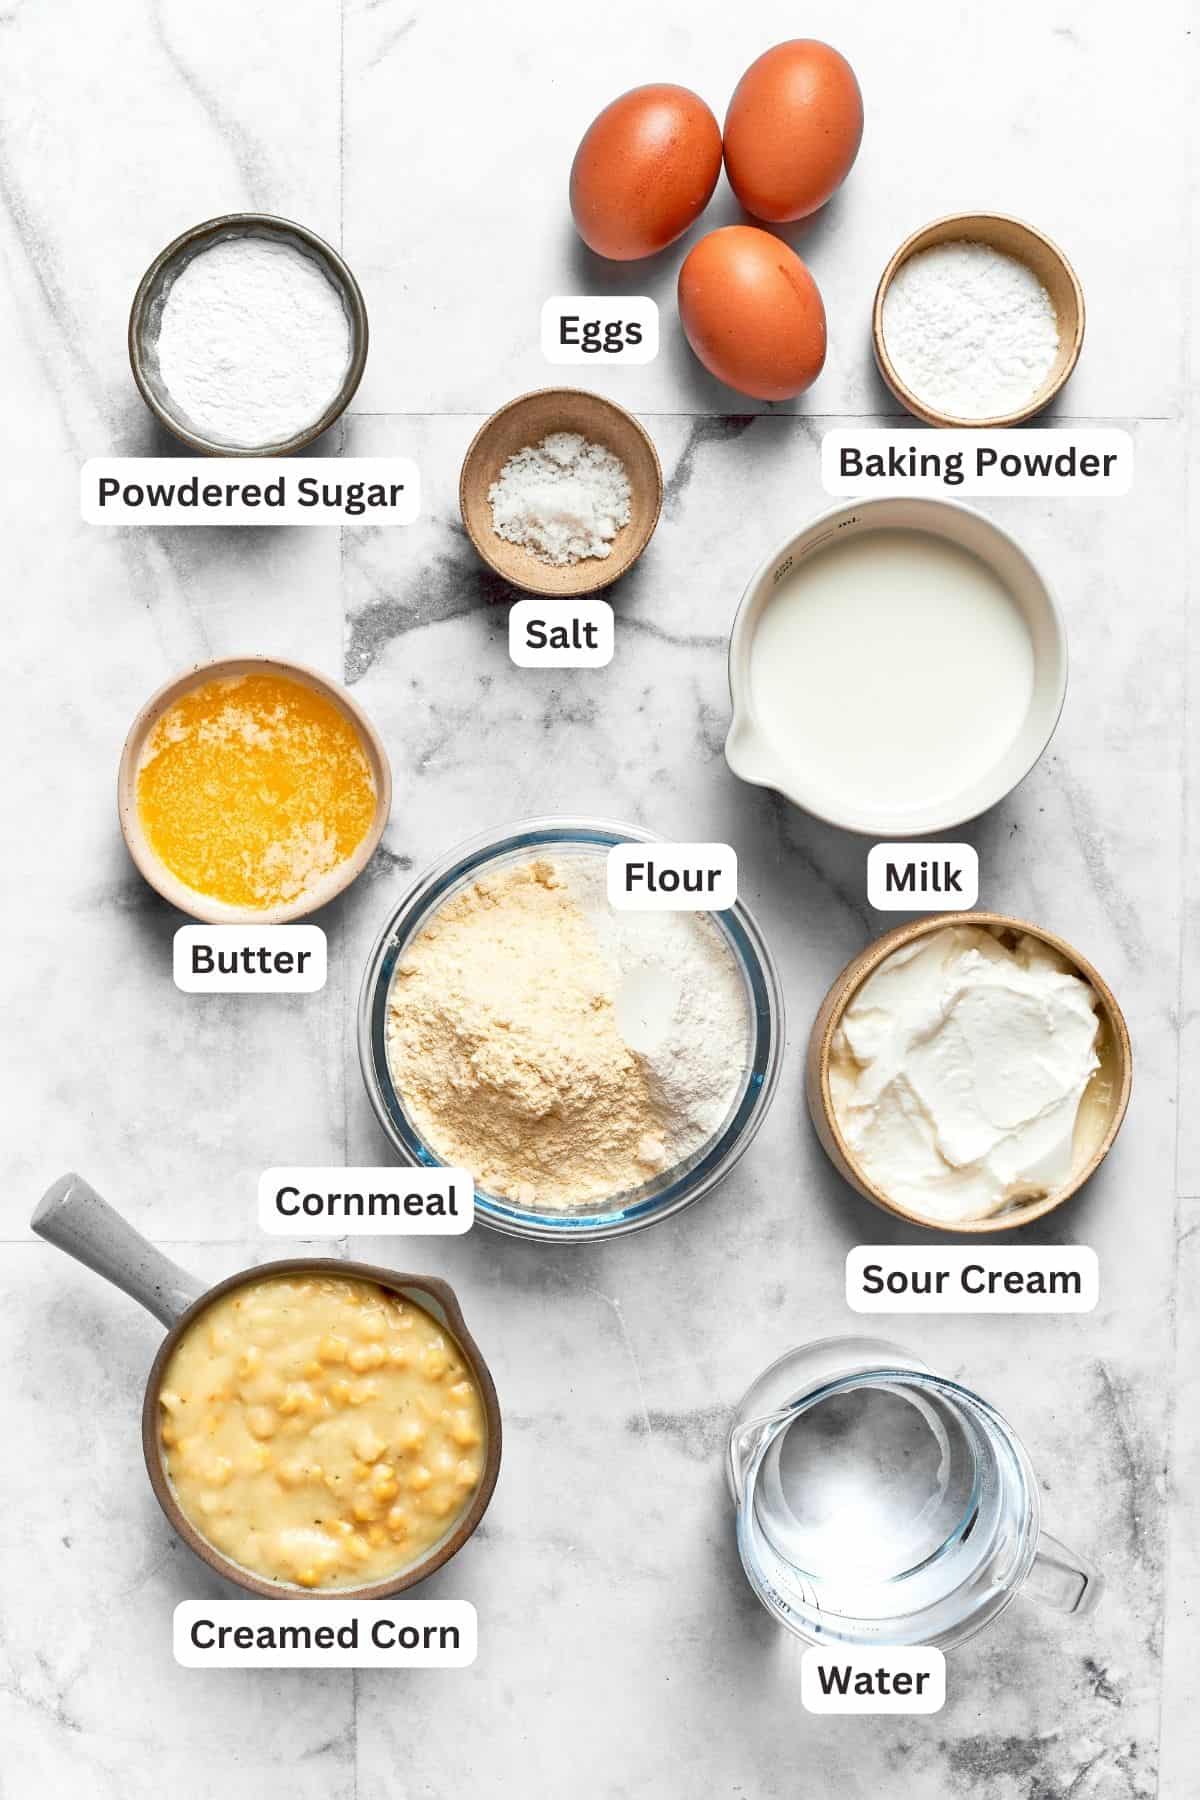 Ingredients needed for spoon bread are shown: baking powder, flour, cornmeal, butter, creamed corn, eggs, powdered sugar, water.